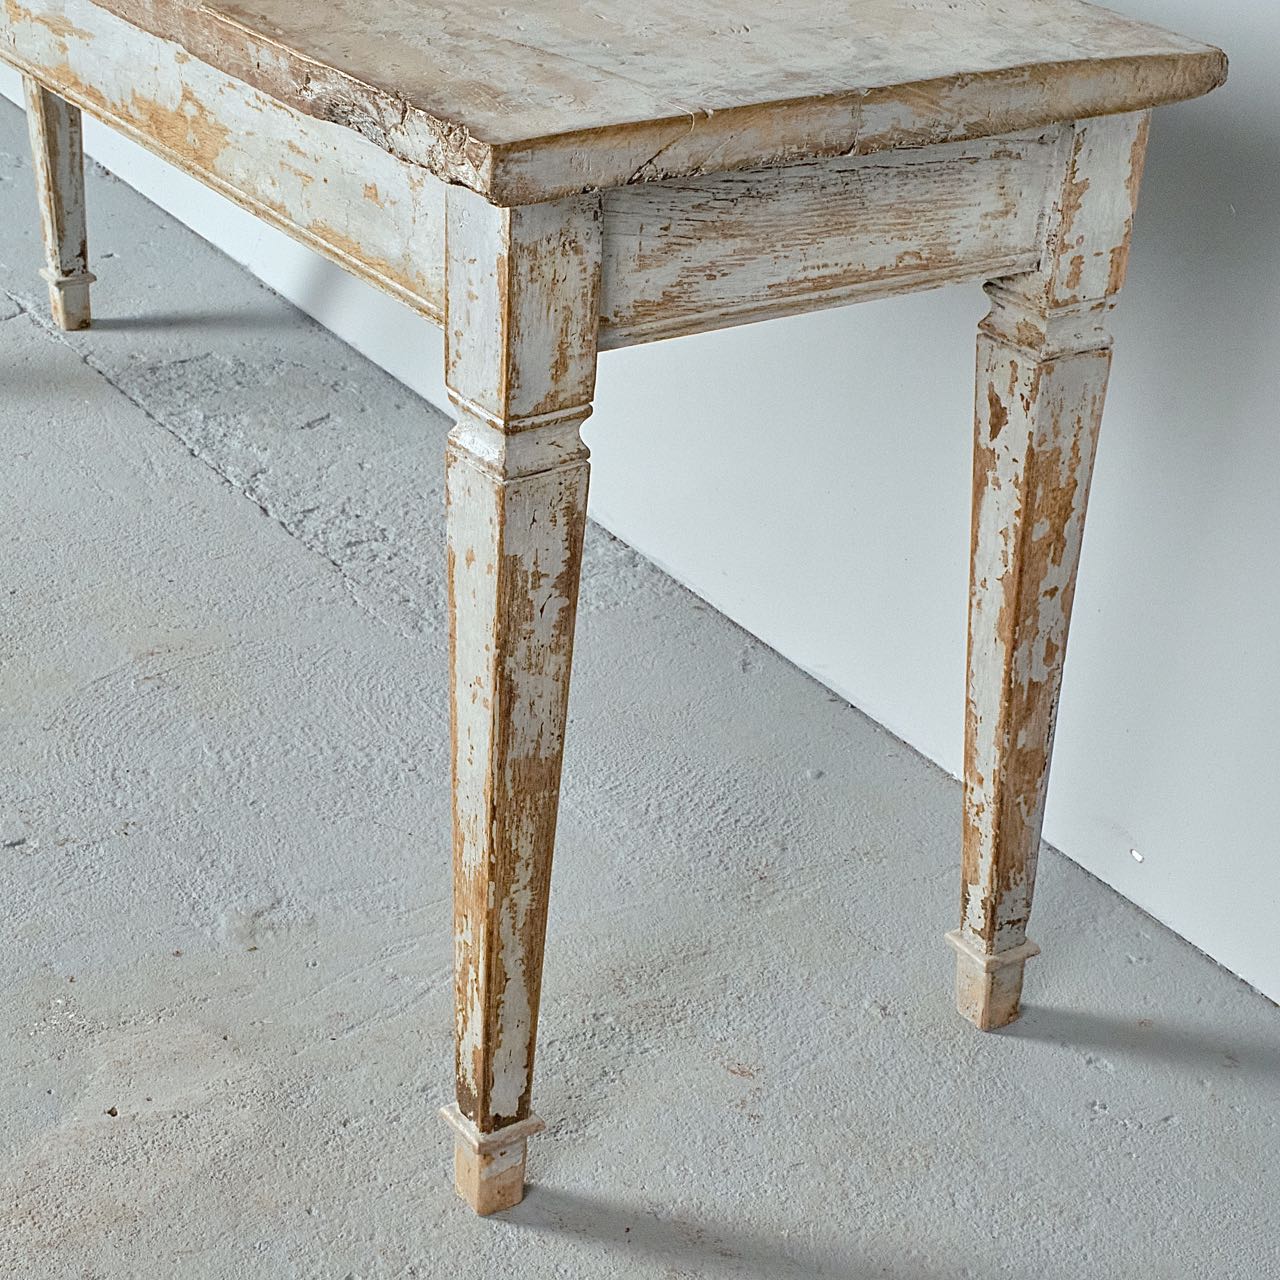 Antique painted Charles IV console table, chestnut